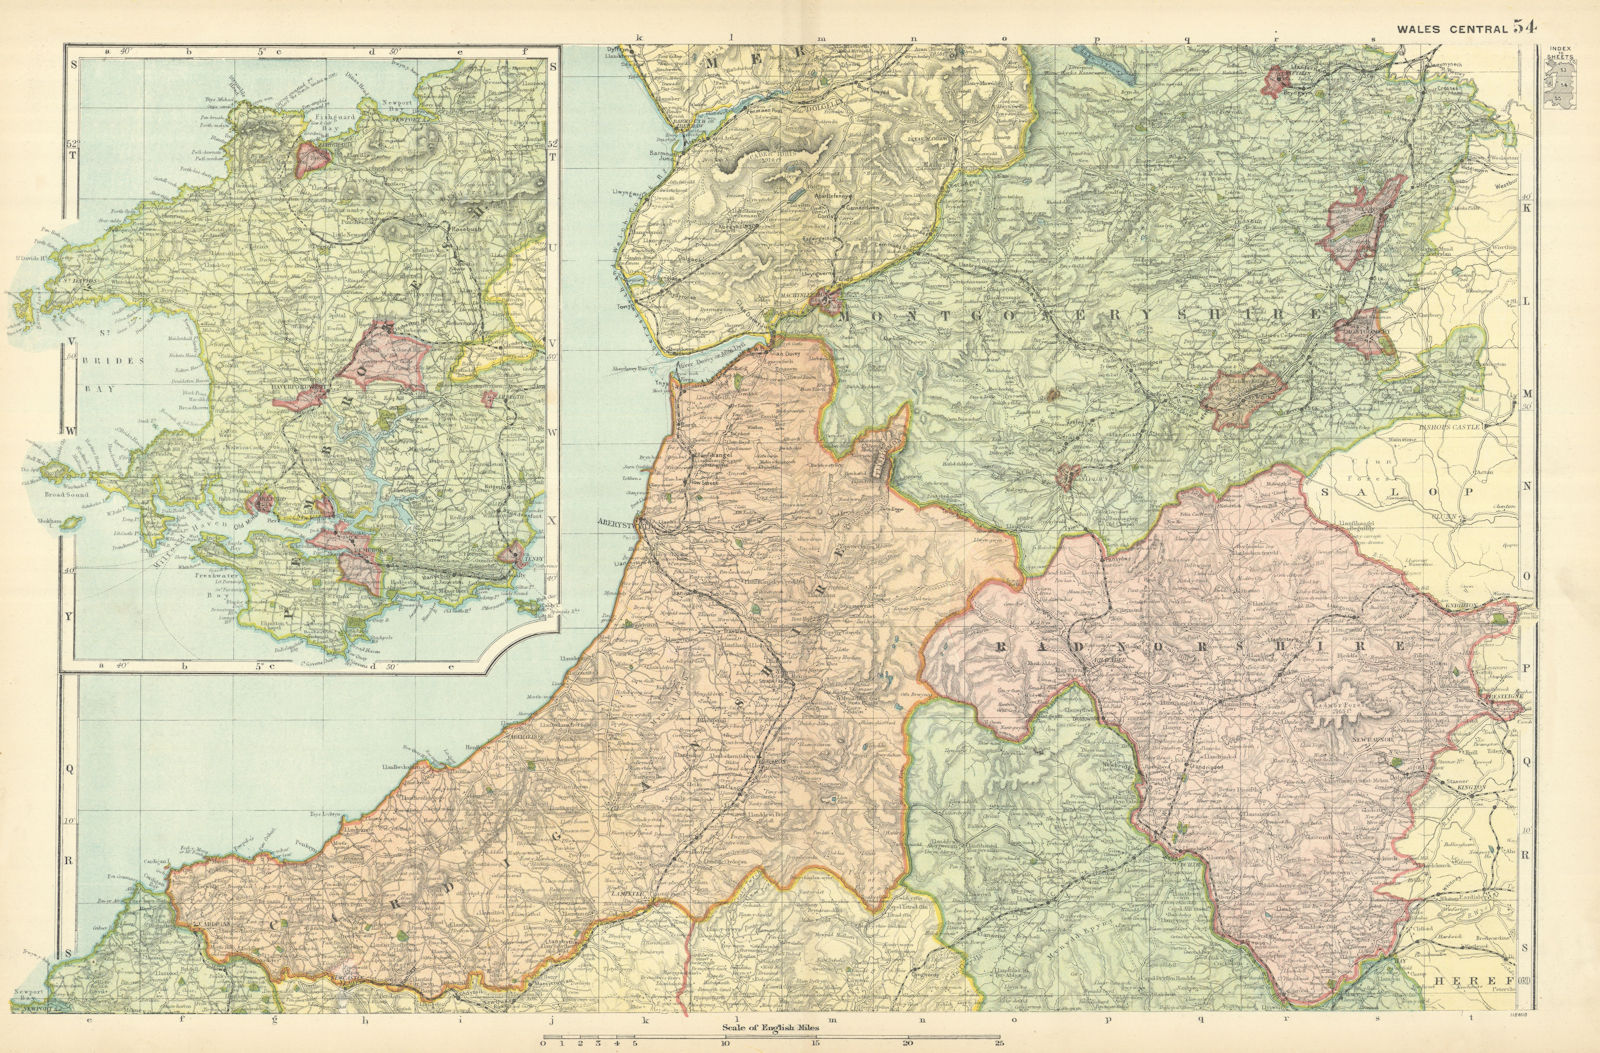 CENTRAL WALES & PEMBROKESHIRE. Showing Parliamentary divisions. BACON 1898 map